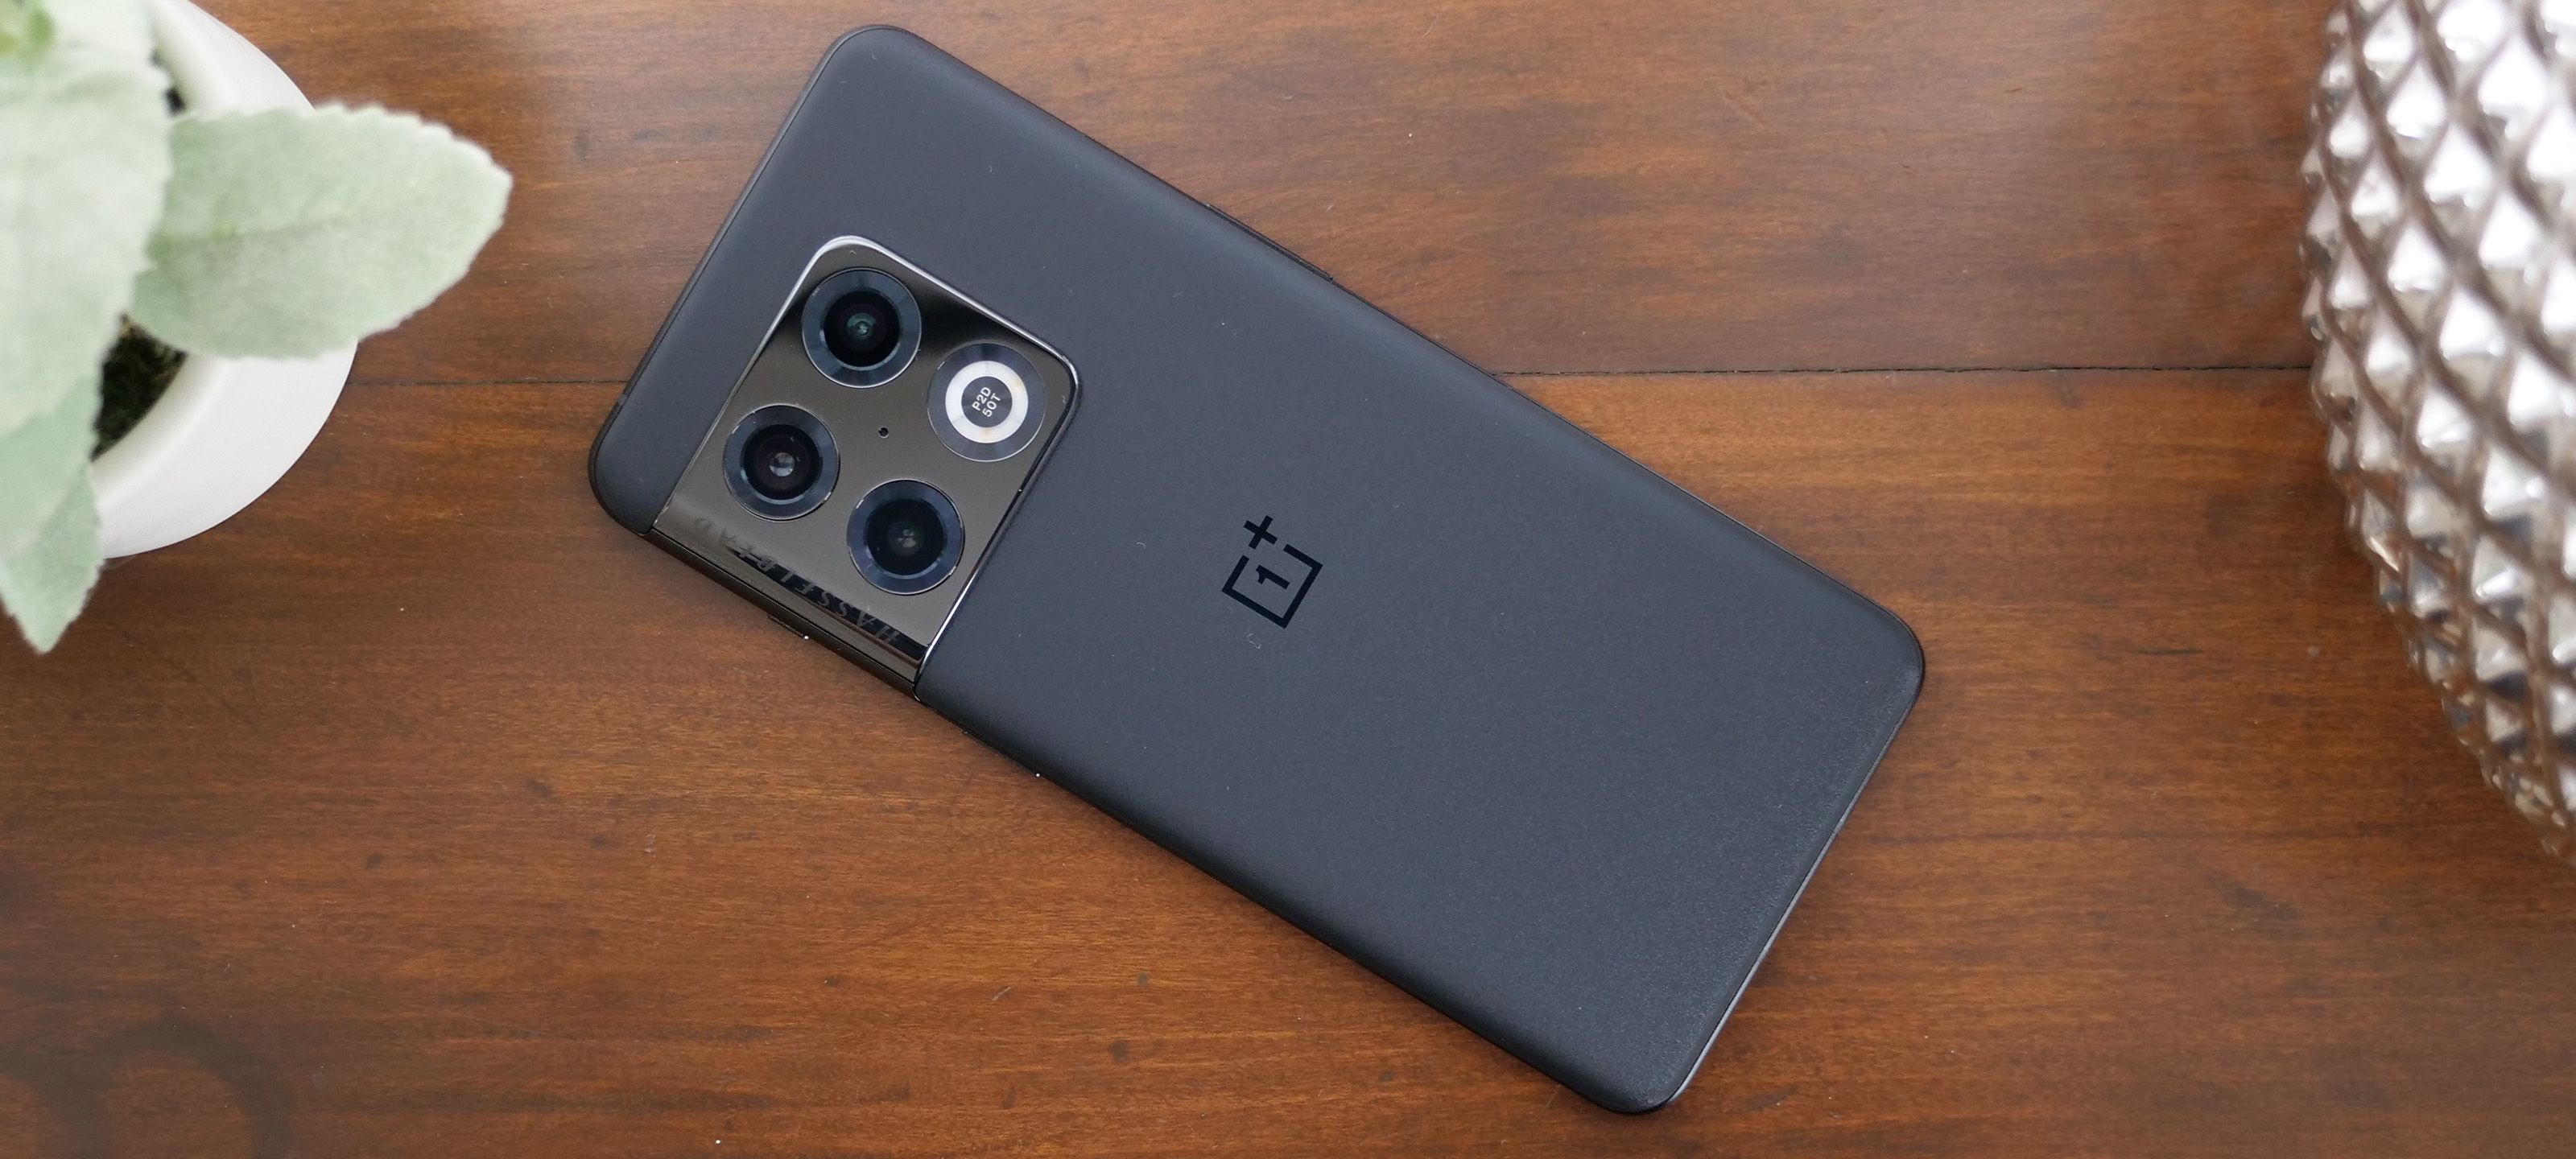 OnePlus 10 Pro review: A solid alternative to Samsung and Google